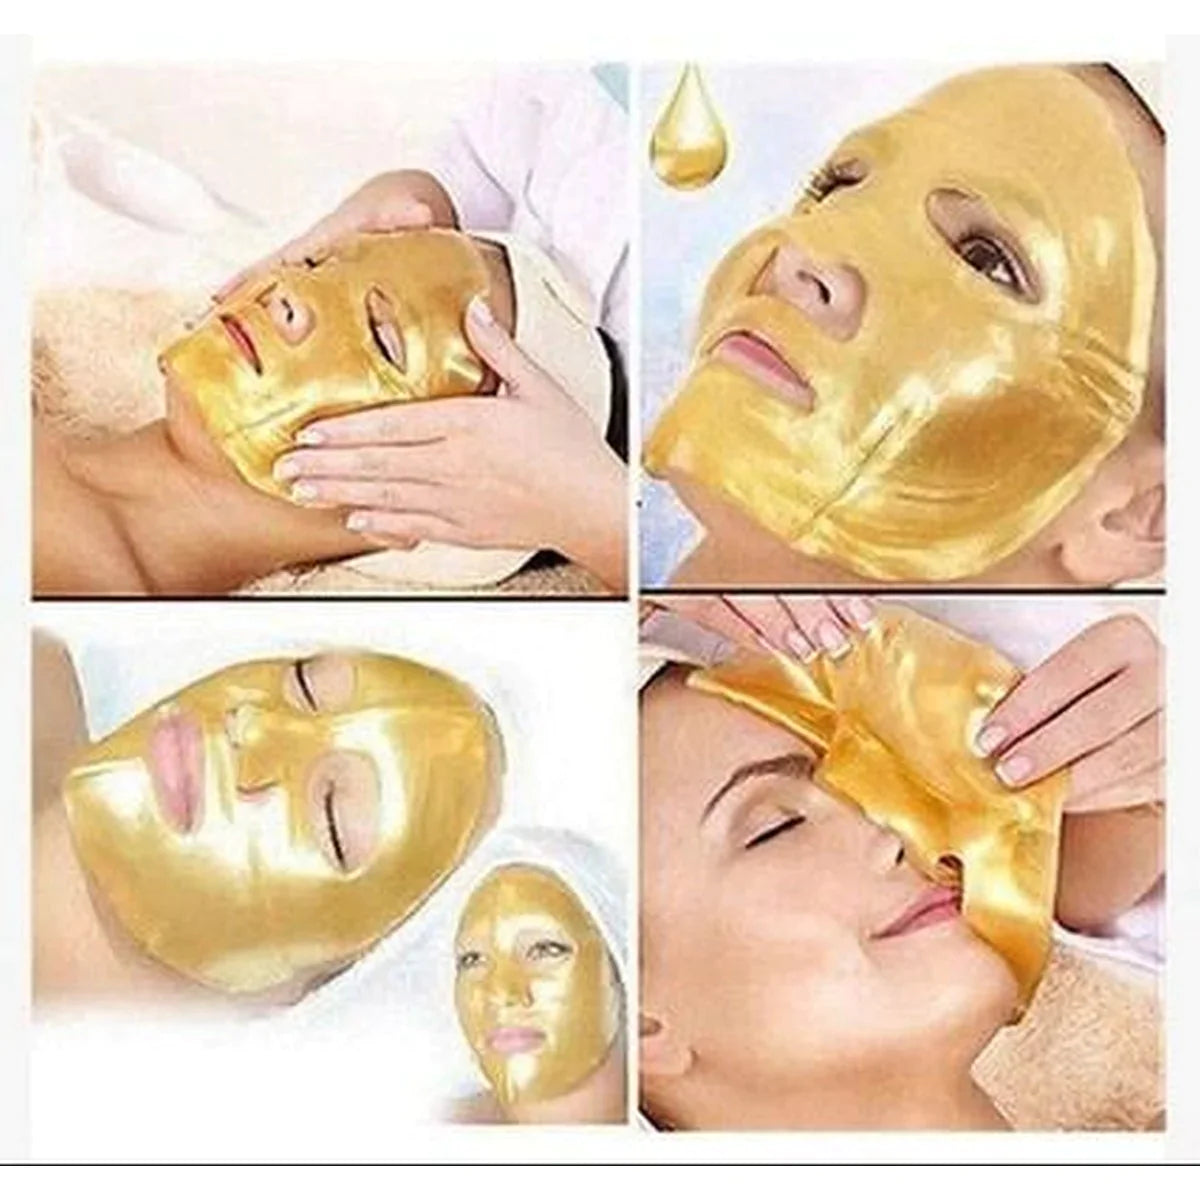 Golden Peel Off  Face Mask For Whitening Lifting Firming Skin